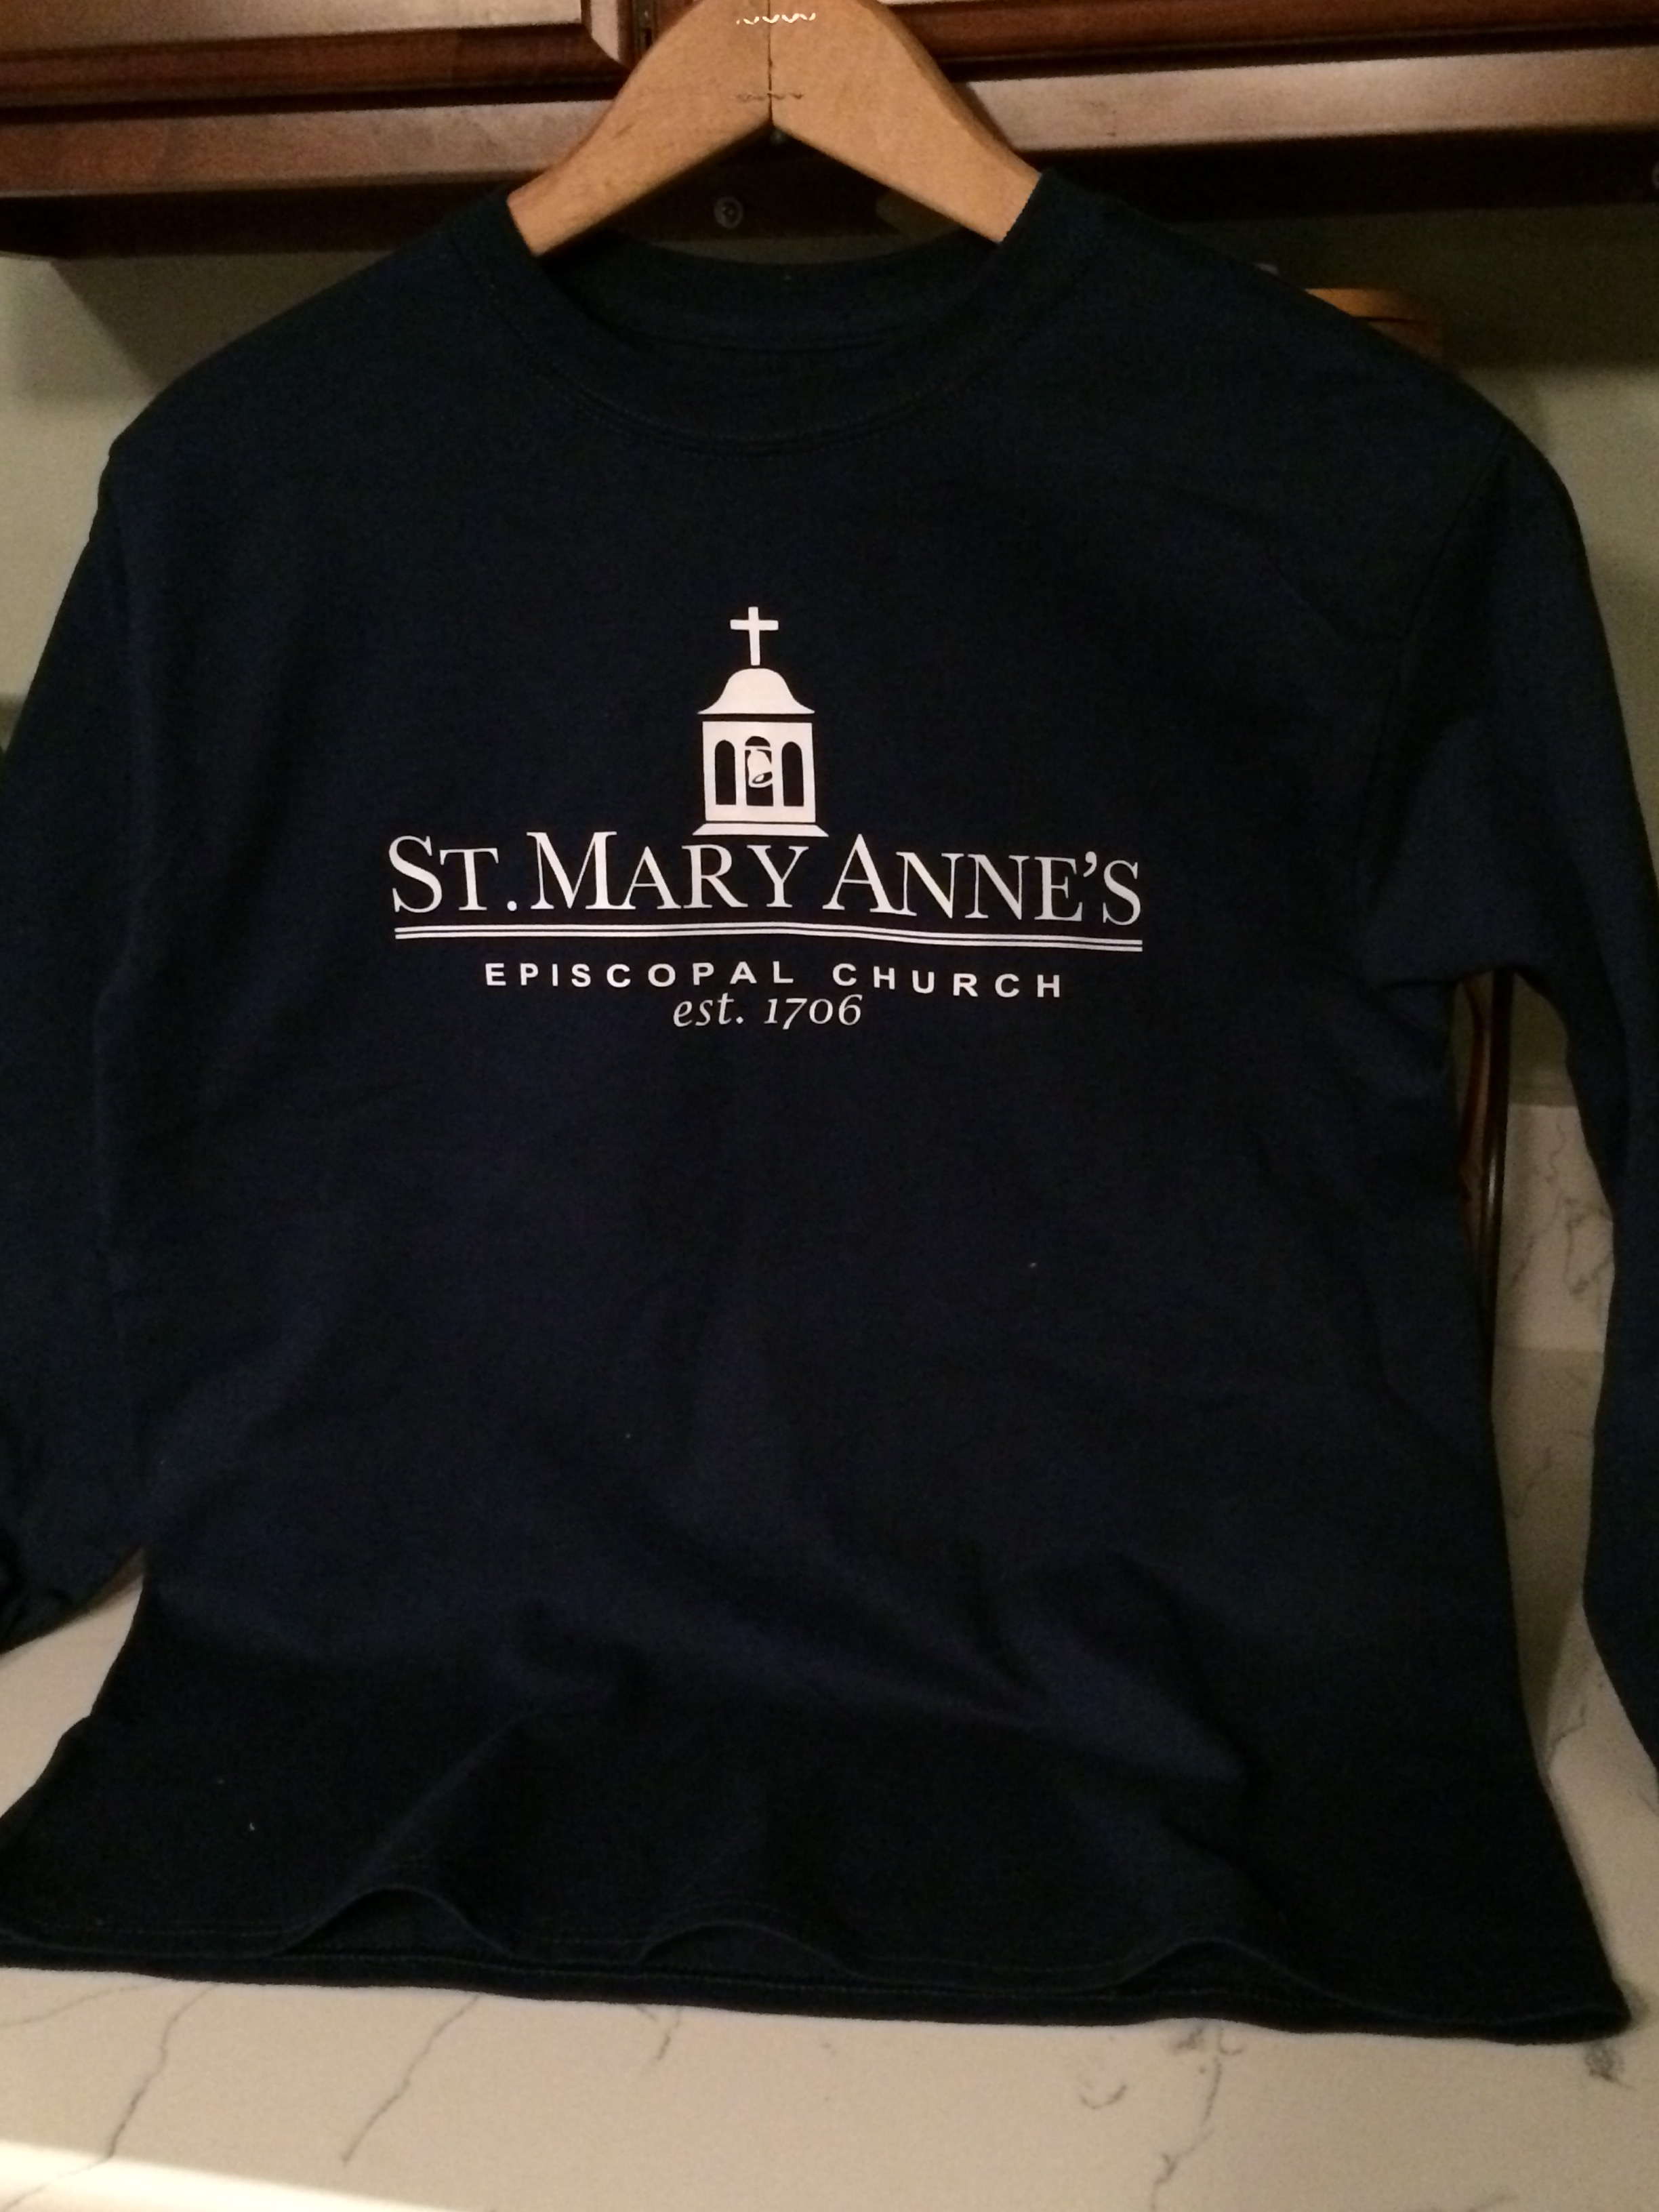 SMA TShirts for Sale! St Mary Anne's Church